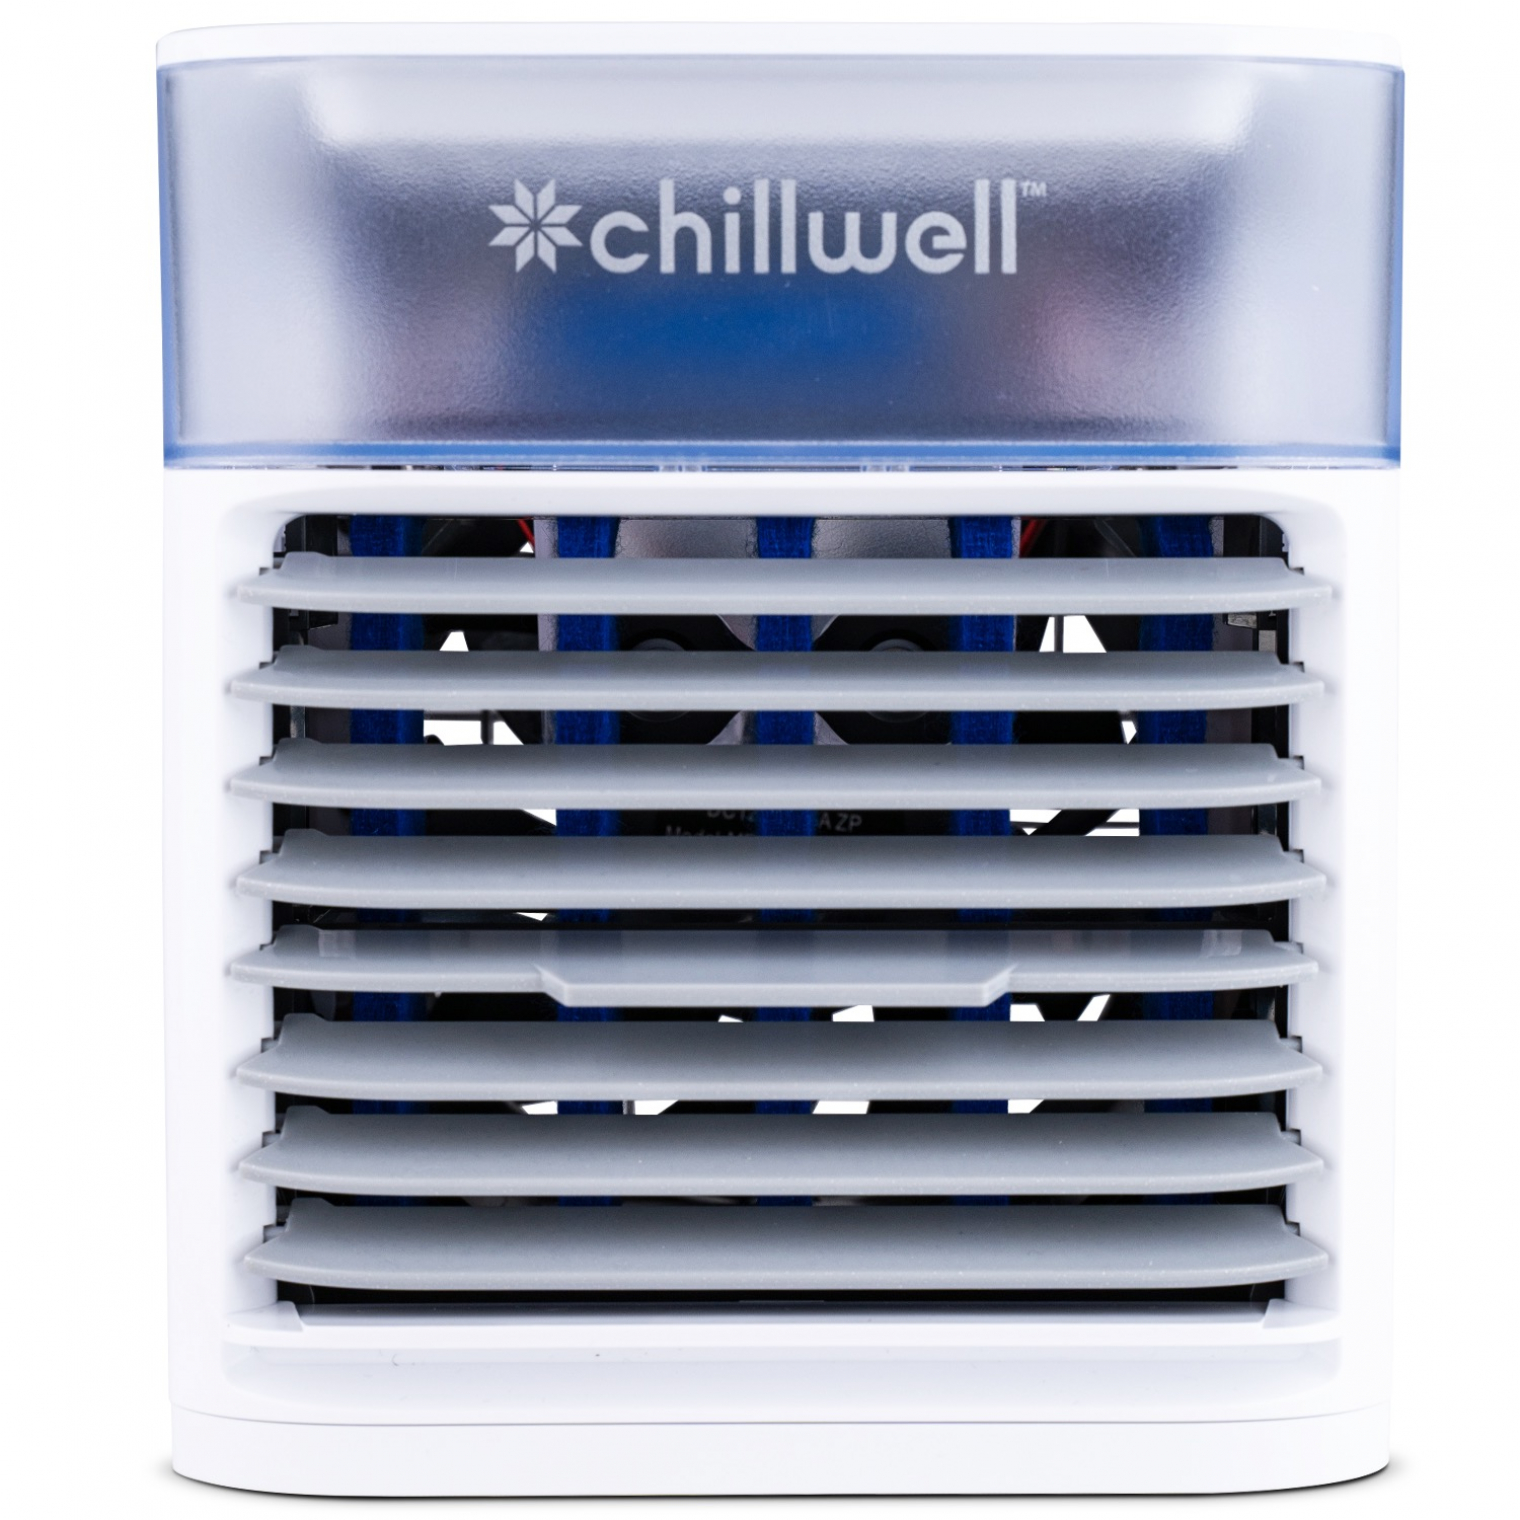 Personal Chillwell Ac